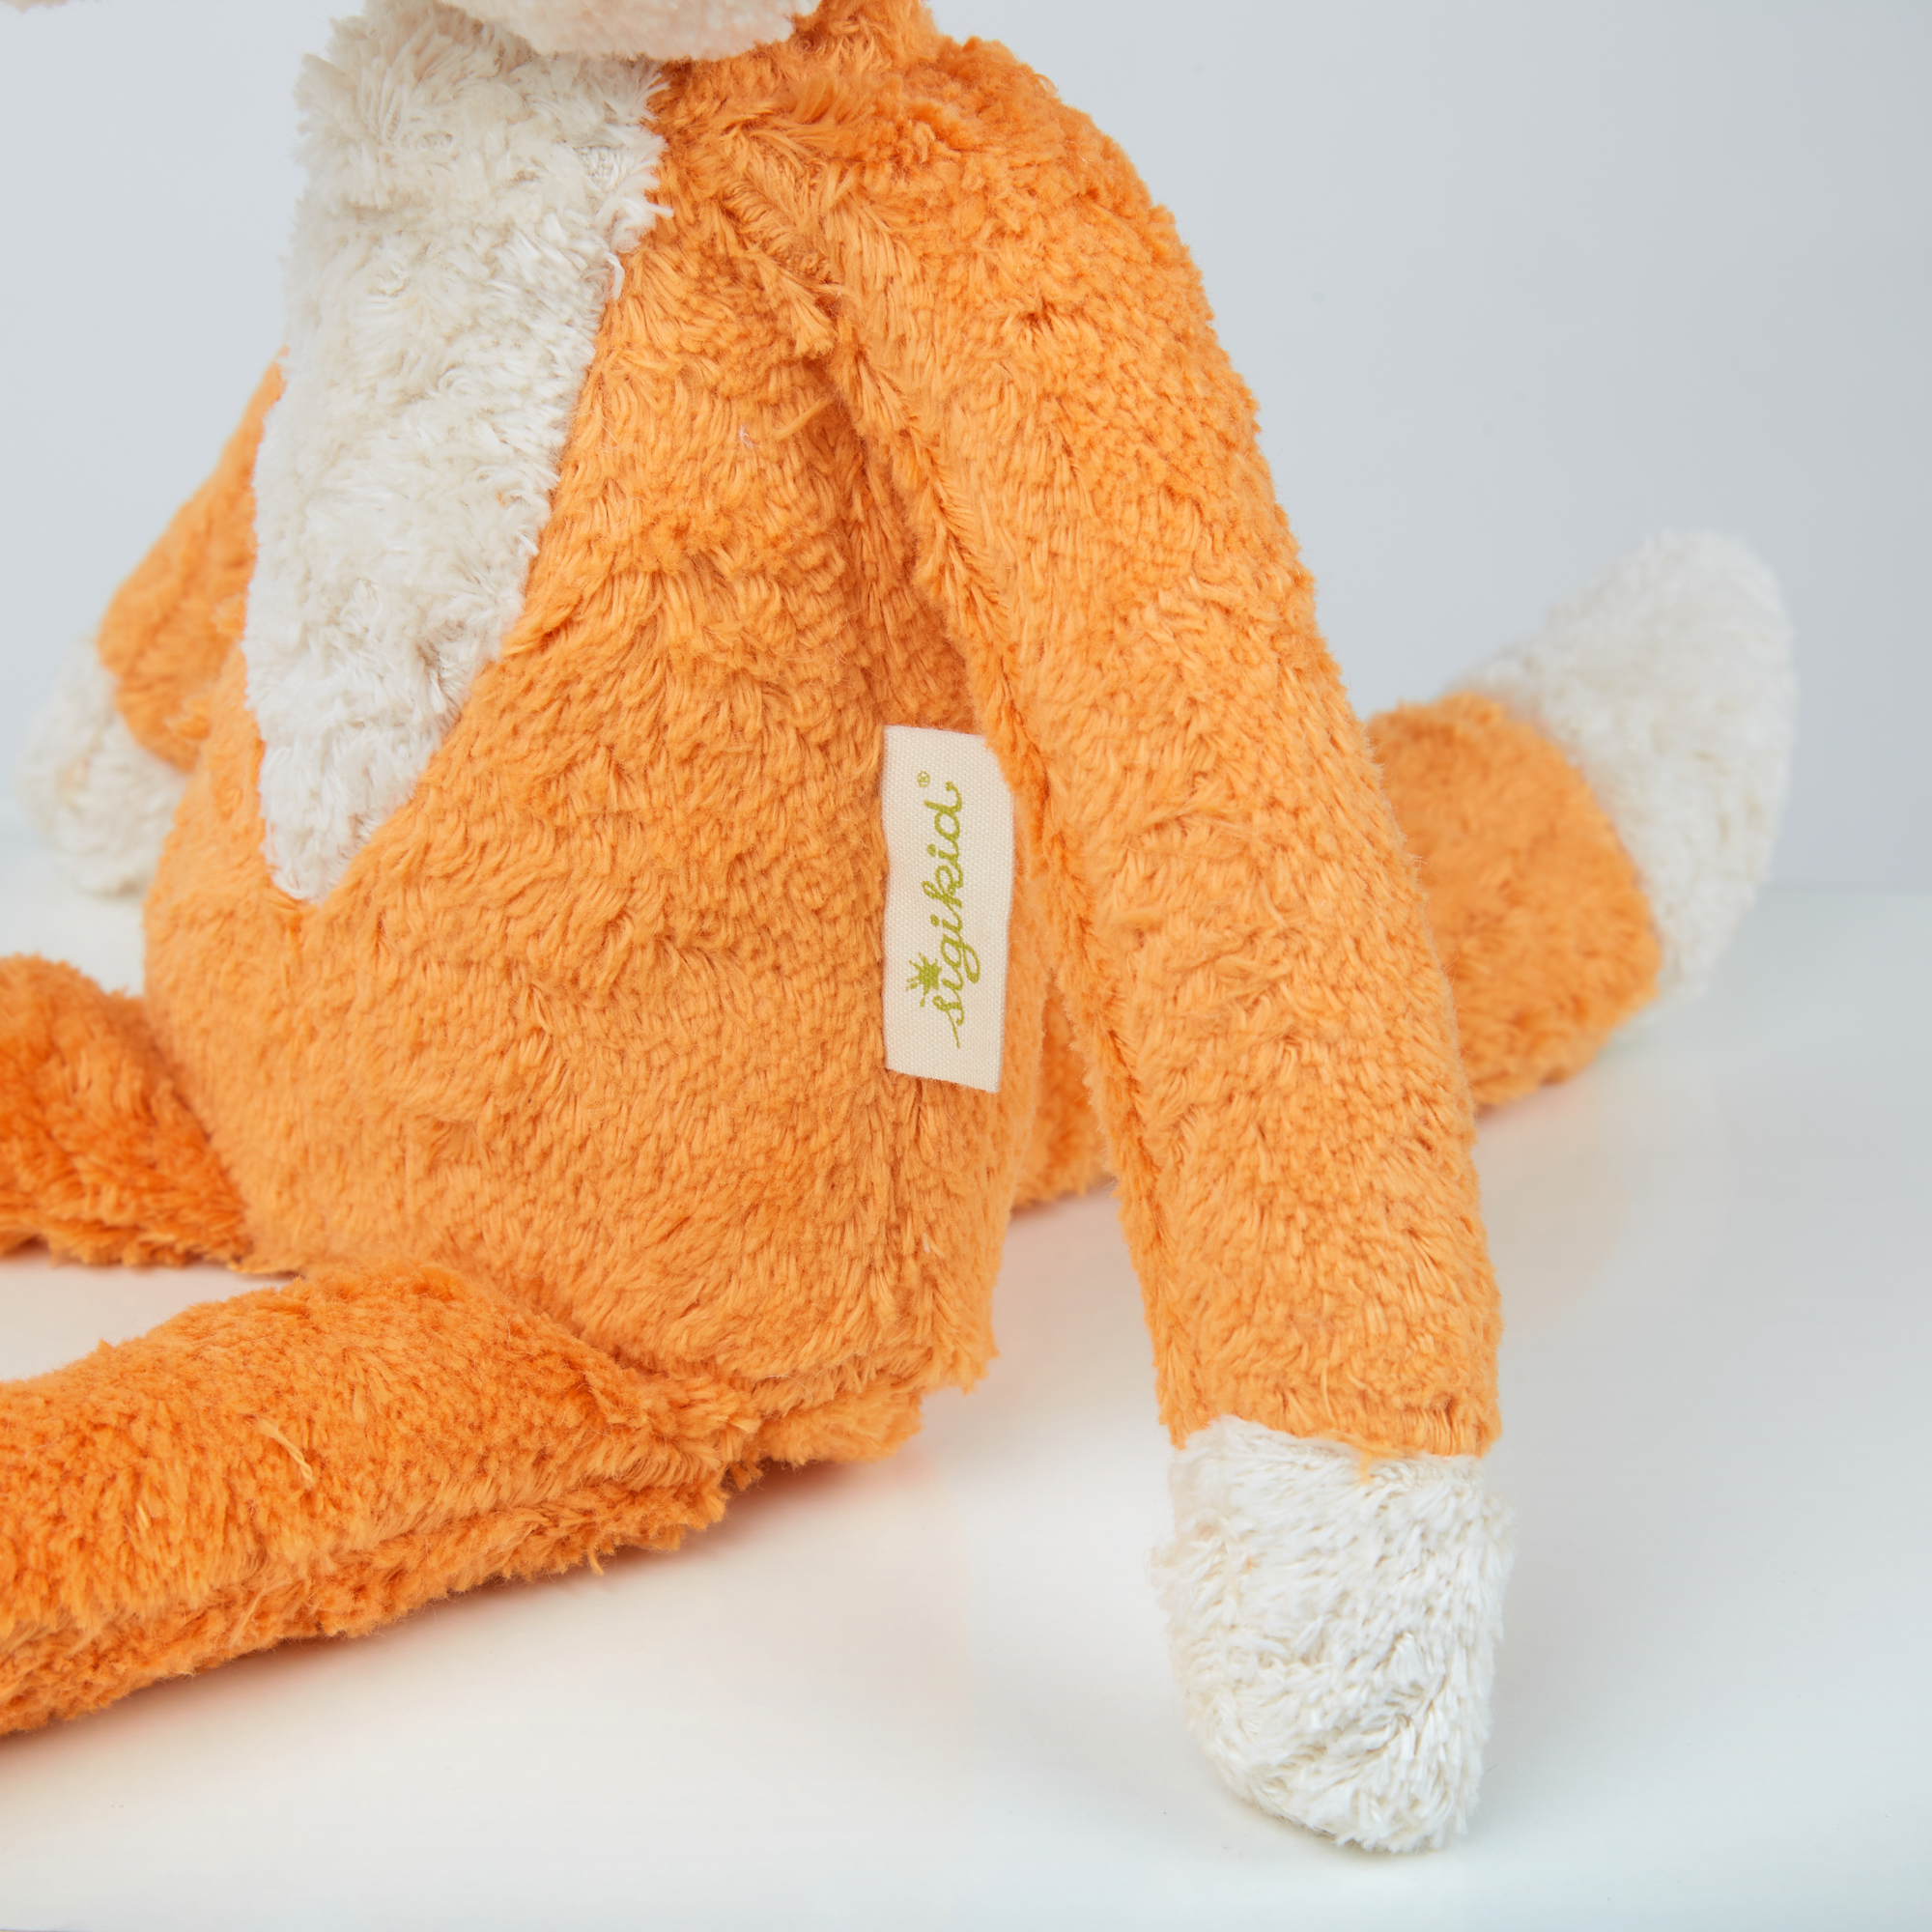 Pure and natural: organic soft toy fox